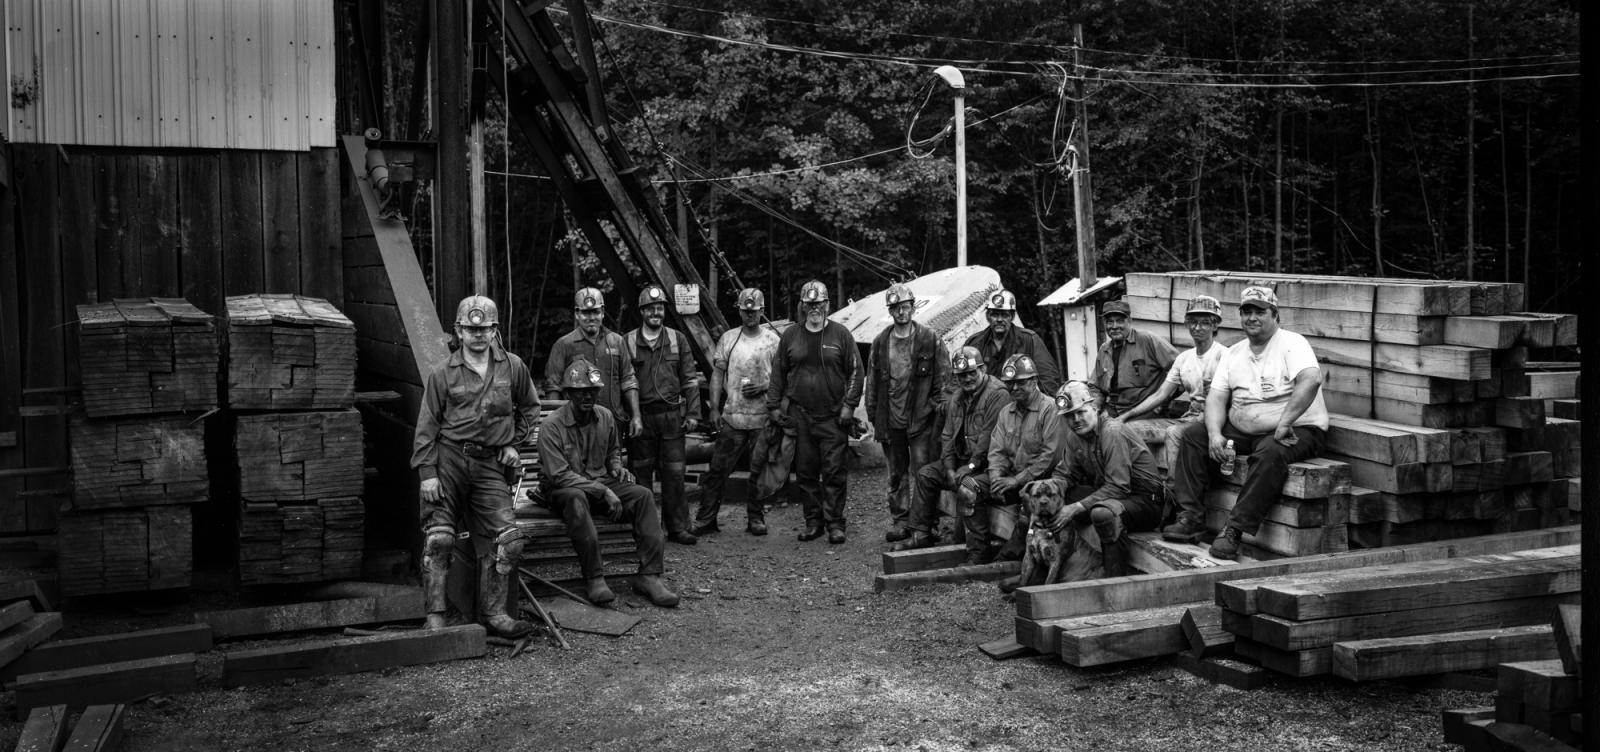 Image from The Portraits -   Orchard Slope Mine crew with dog  